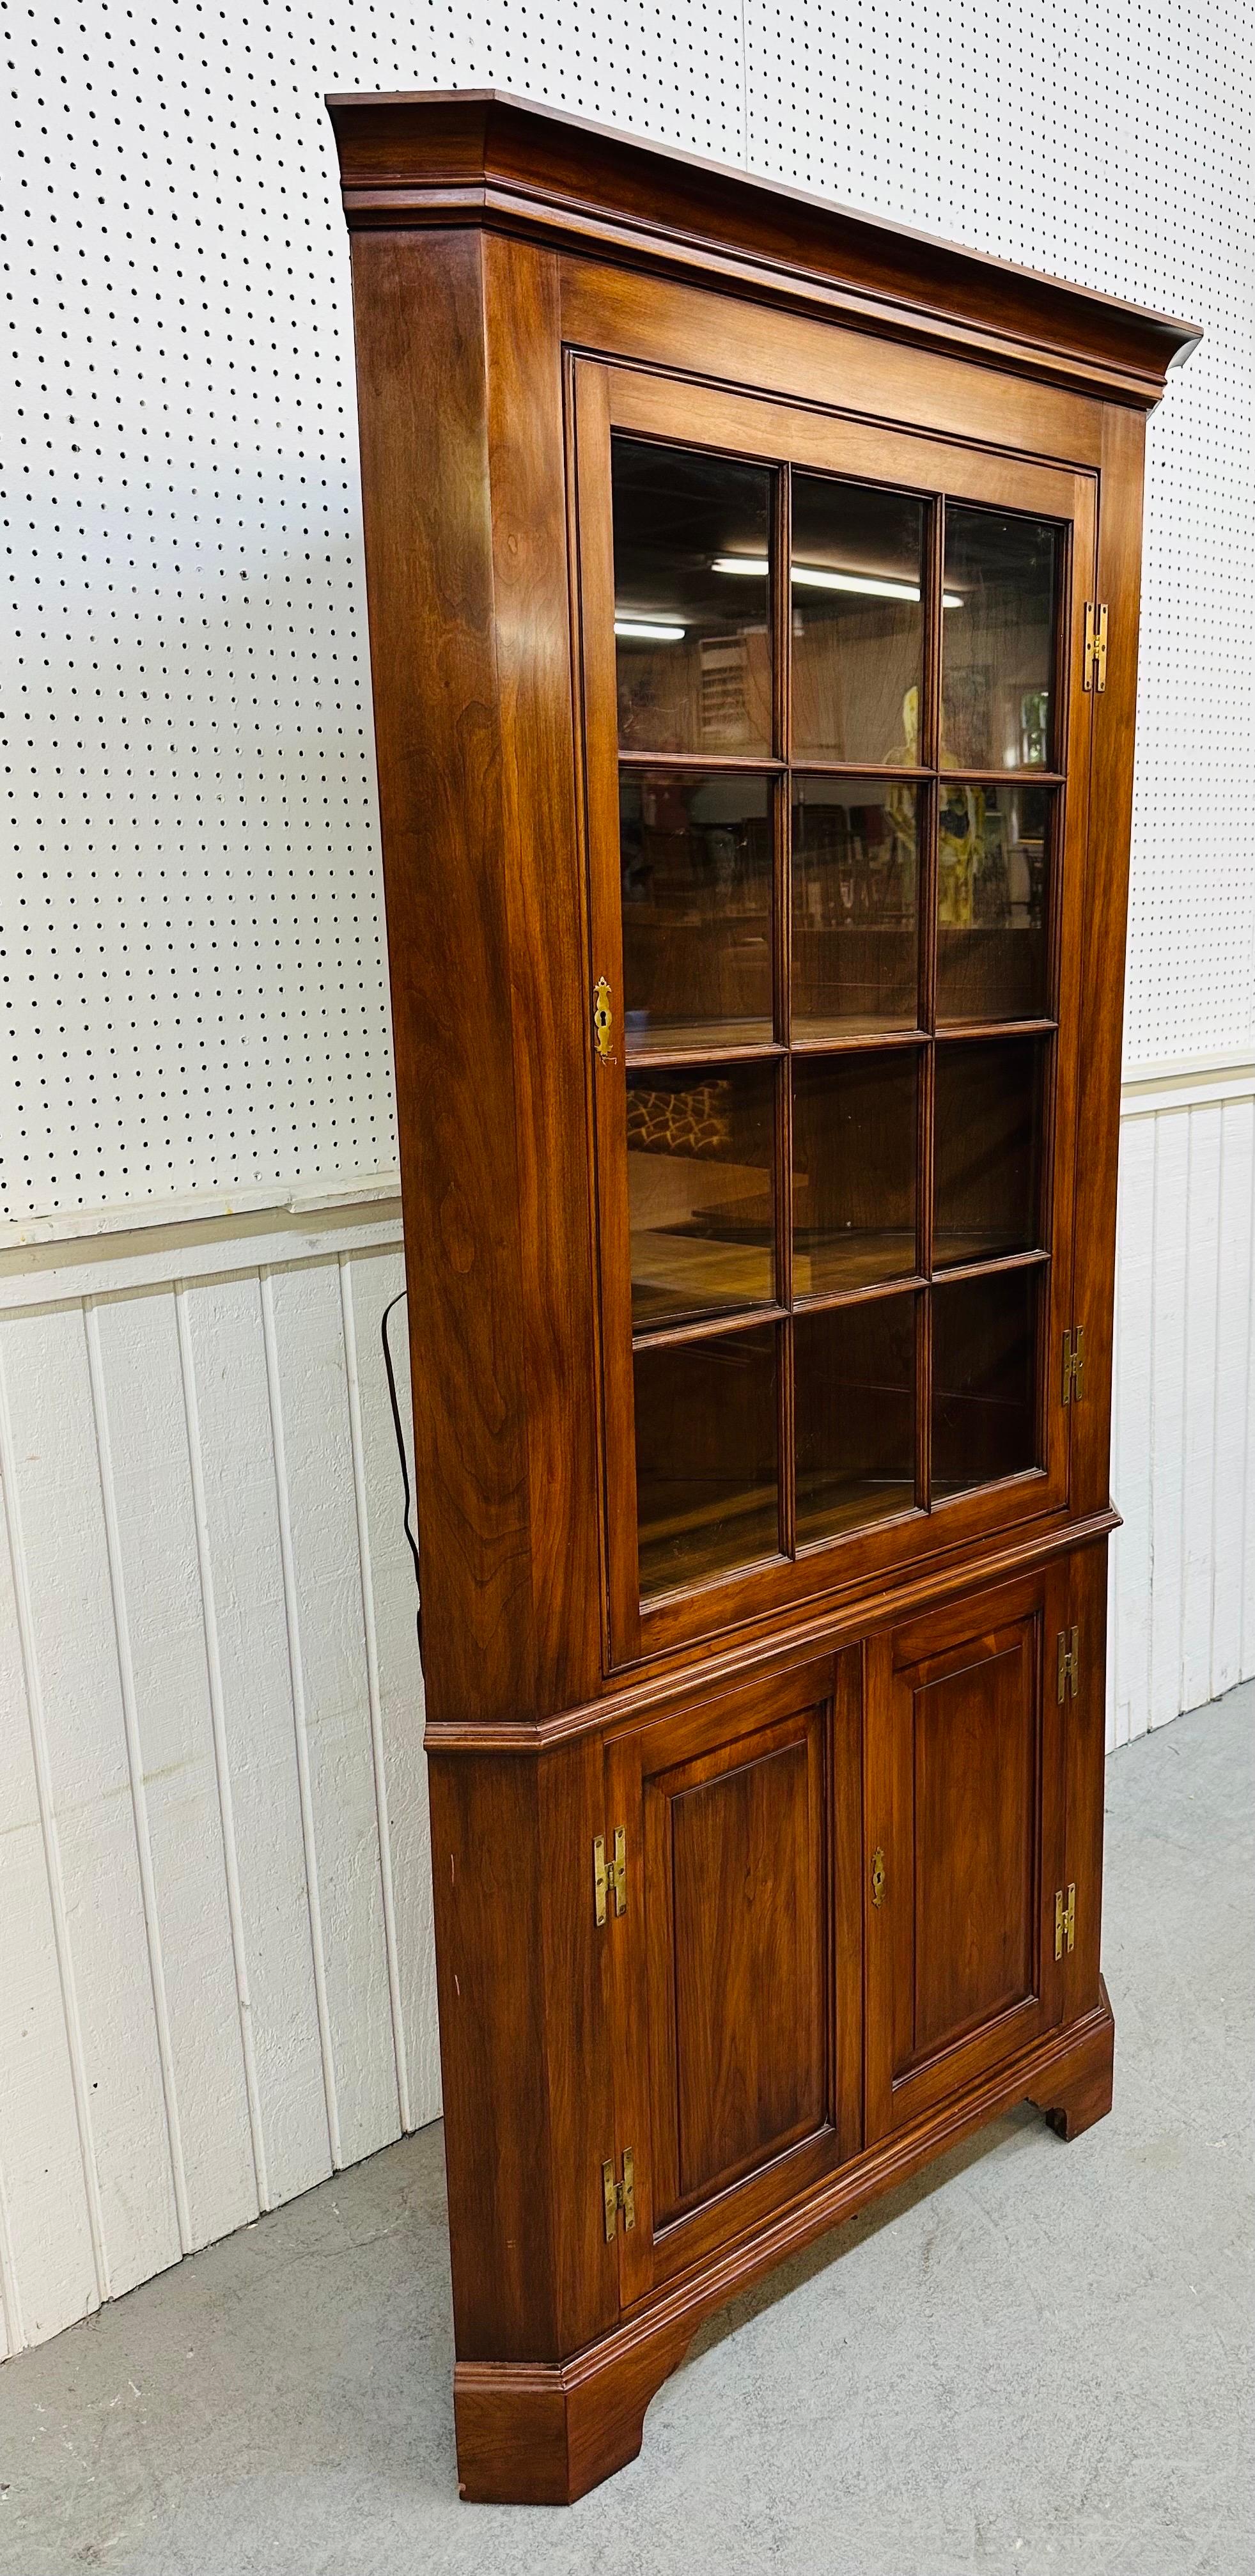 This listing is for a Vintage Henkel Harris Cherry Corner Cabinet. Featuring an antique style design, a glass locking door that opens up to three shelves, interior light, bottom locking doors that open up to more storage space, original key, and a